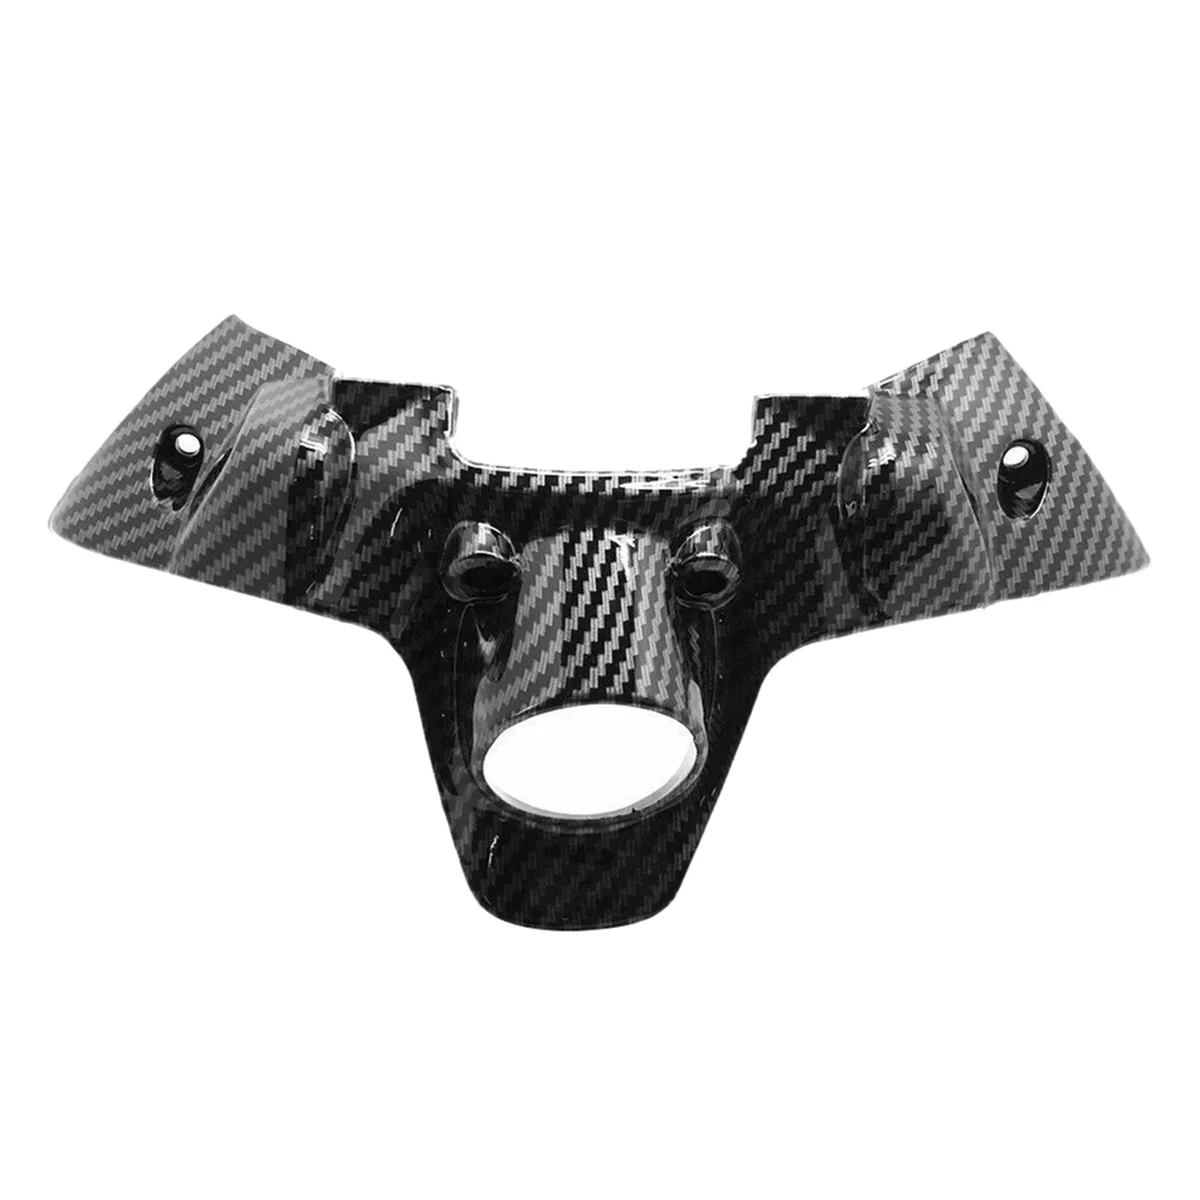 

Motorcycle for Ducati PANIGALE V2 899 959 1199 1299 Carbon Fiber Color Ignition Key Cover Electric Door Cover Fairing